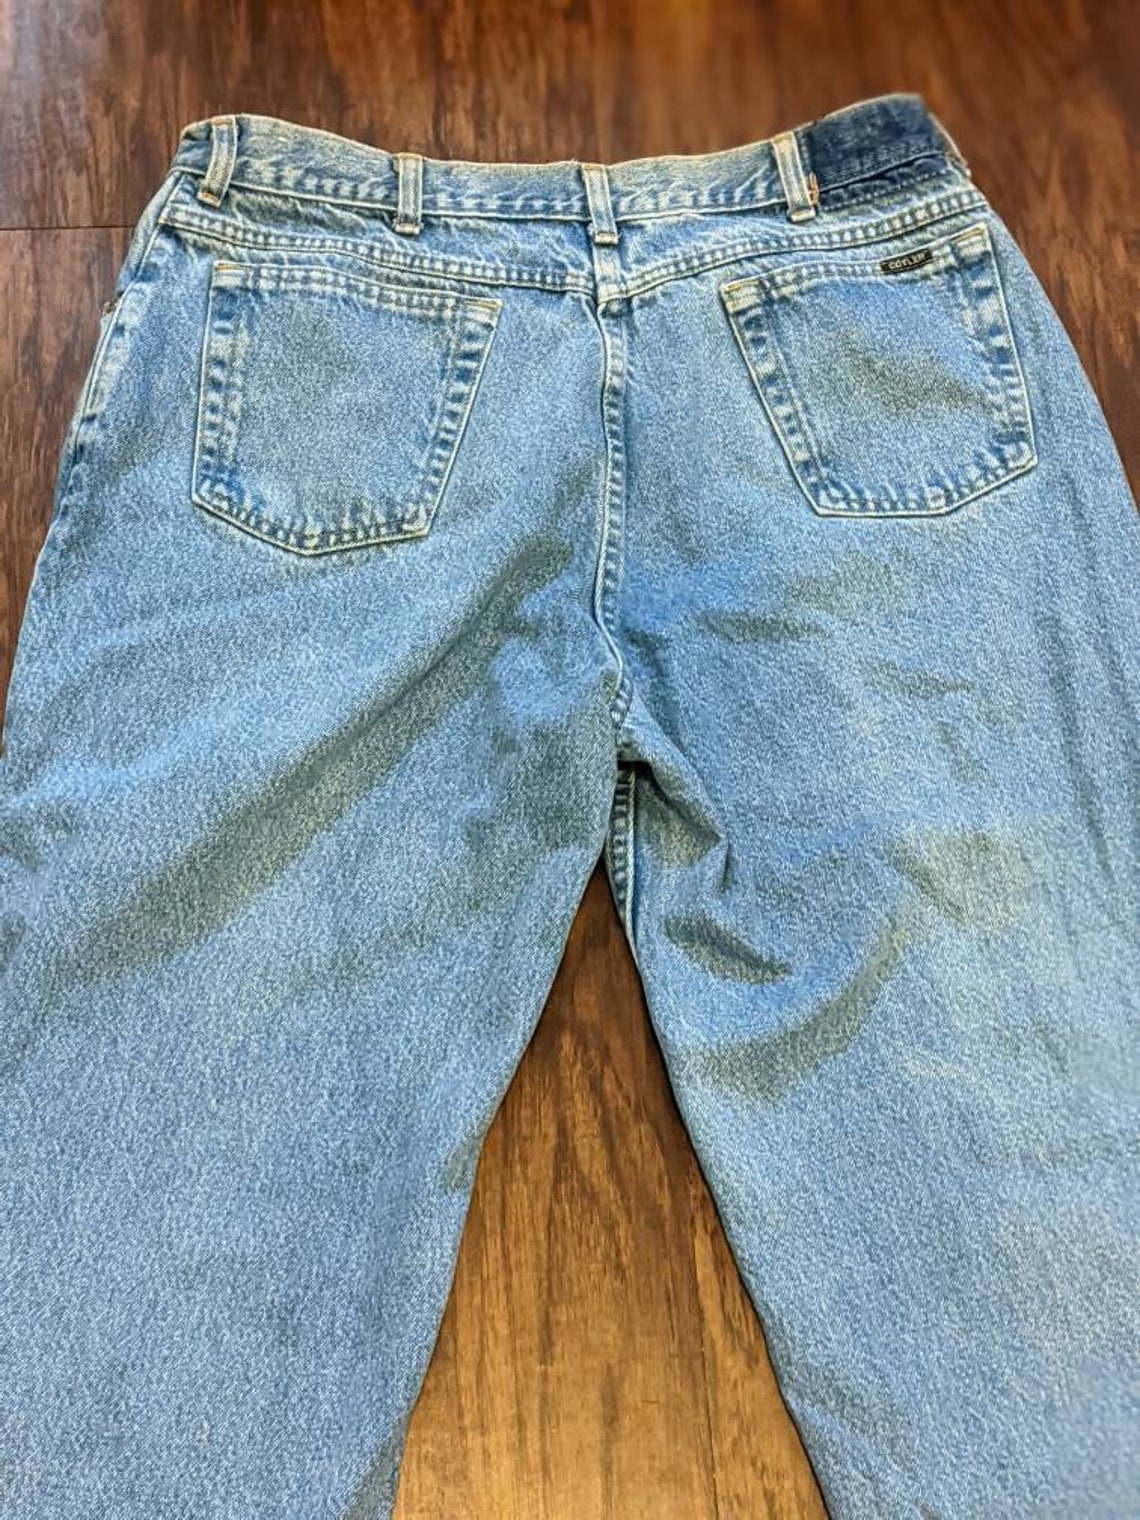 Cotler Jeans Made in USA 1970s/80s Vintage Talon Zipper - Etsy